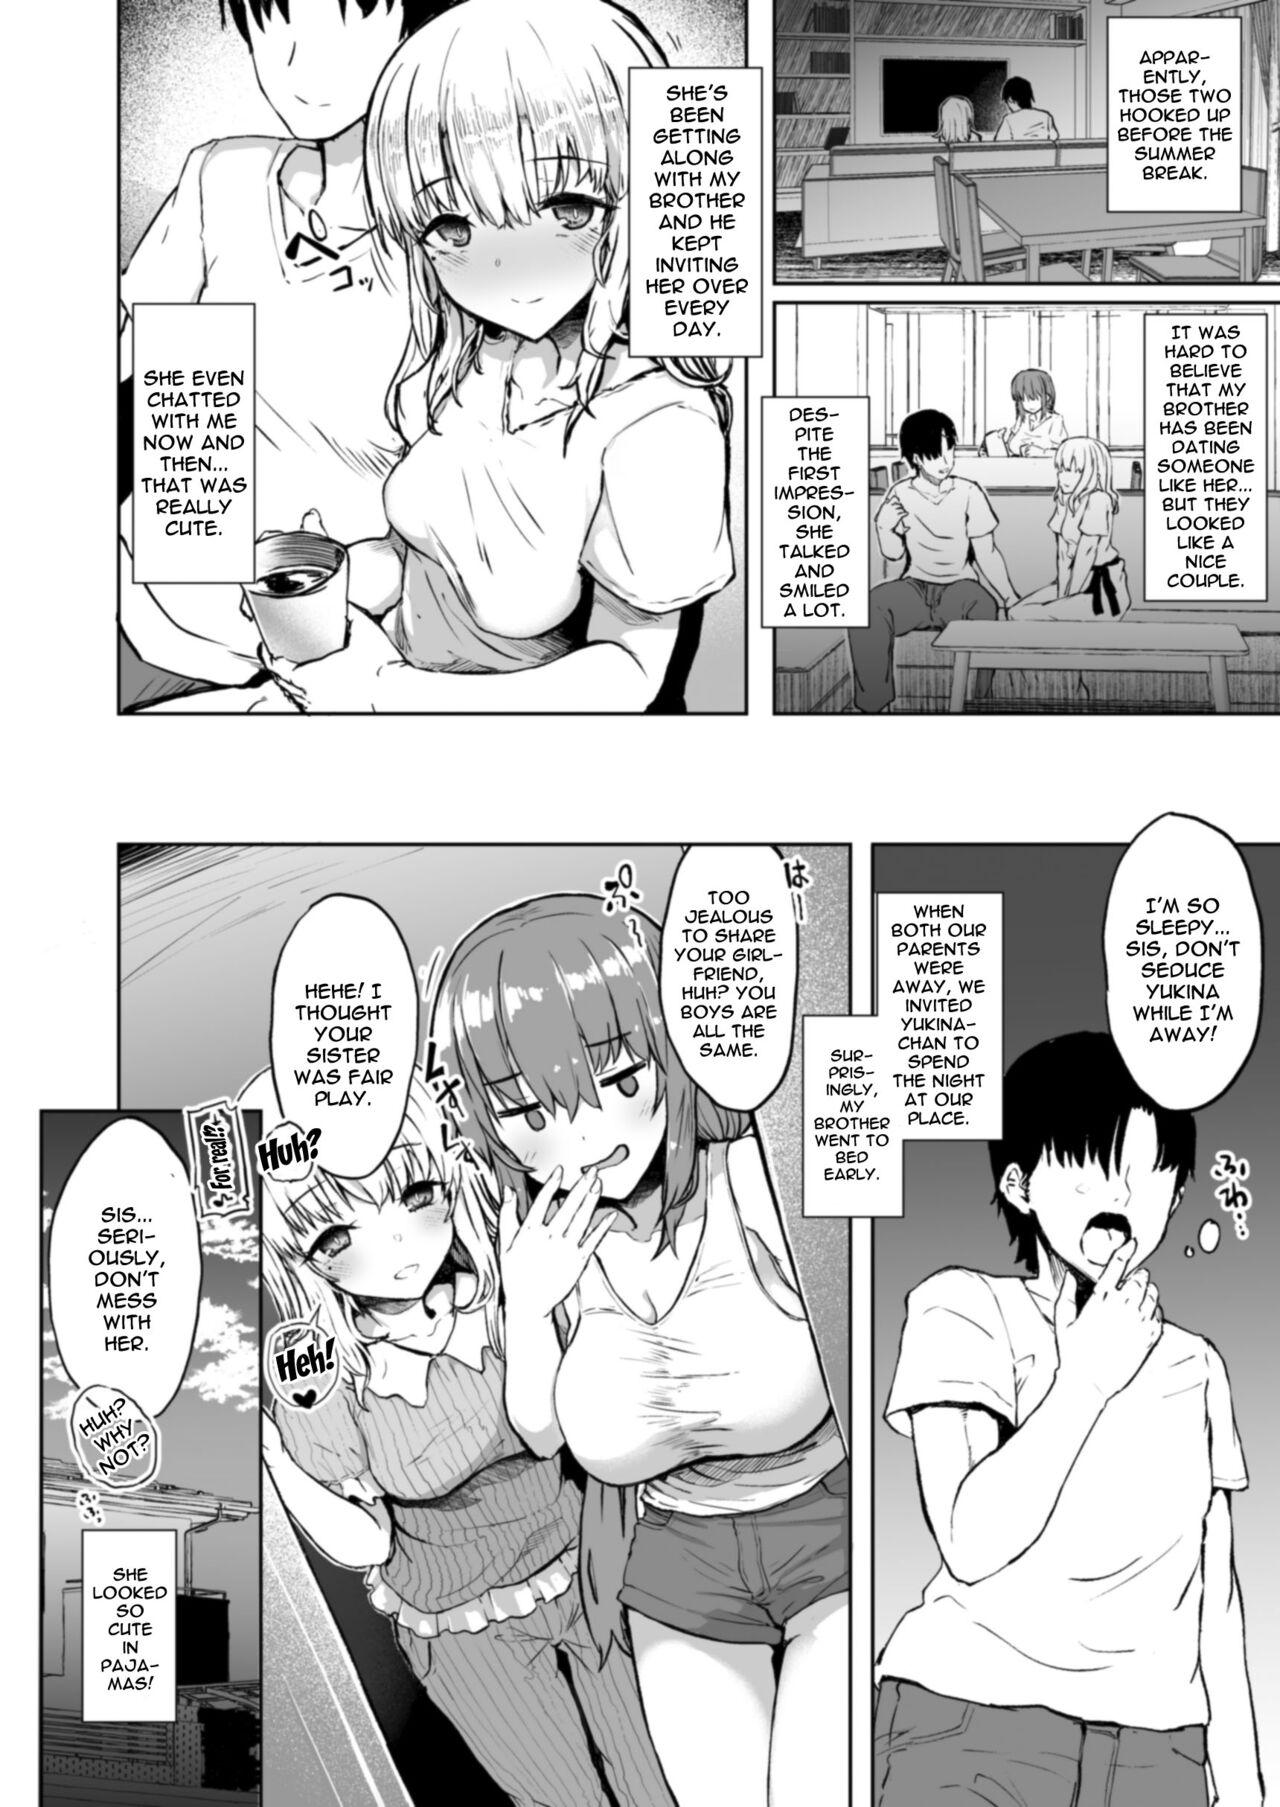 Titten Otouto no Kanojo | My Little Brother's Girlfriend - Original French Porn - Page 4